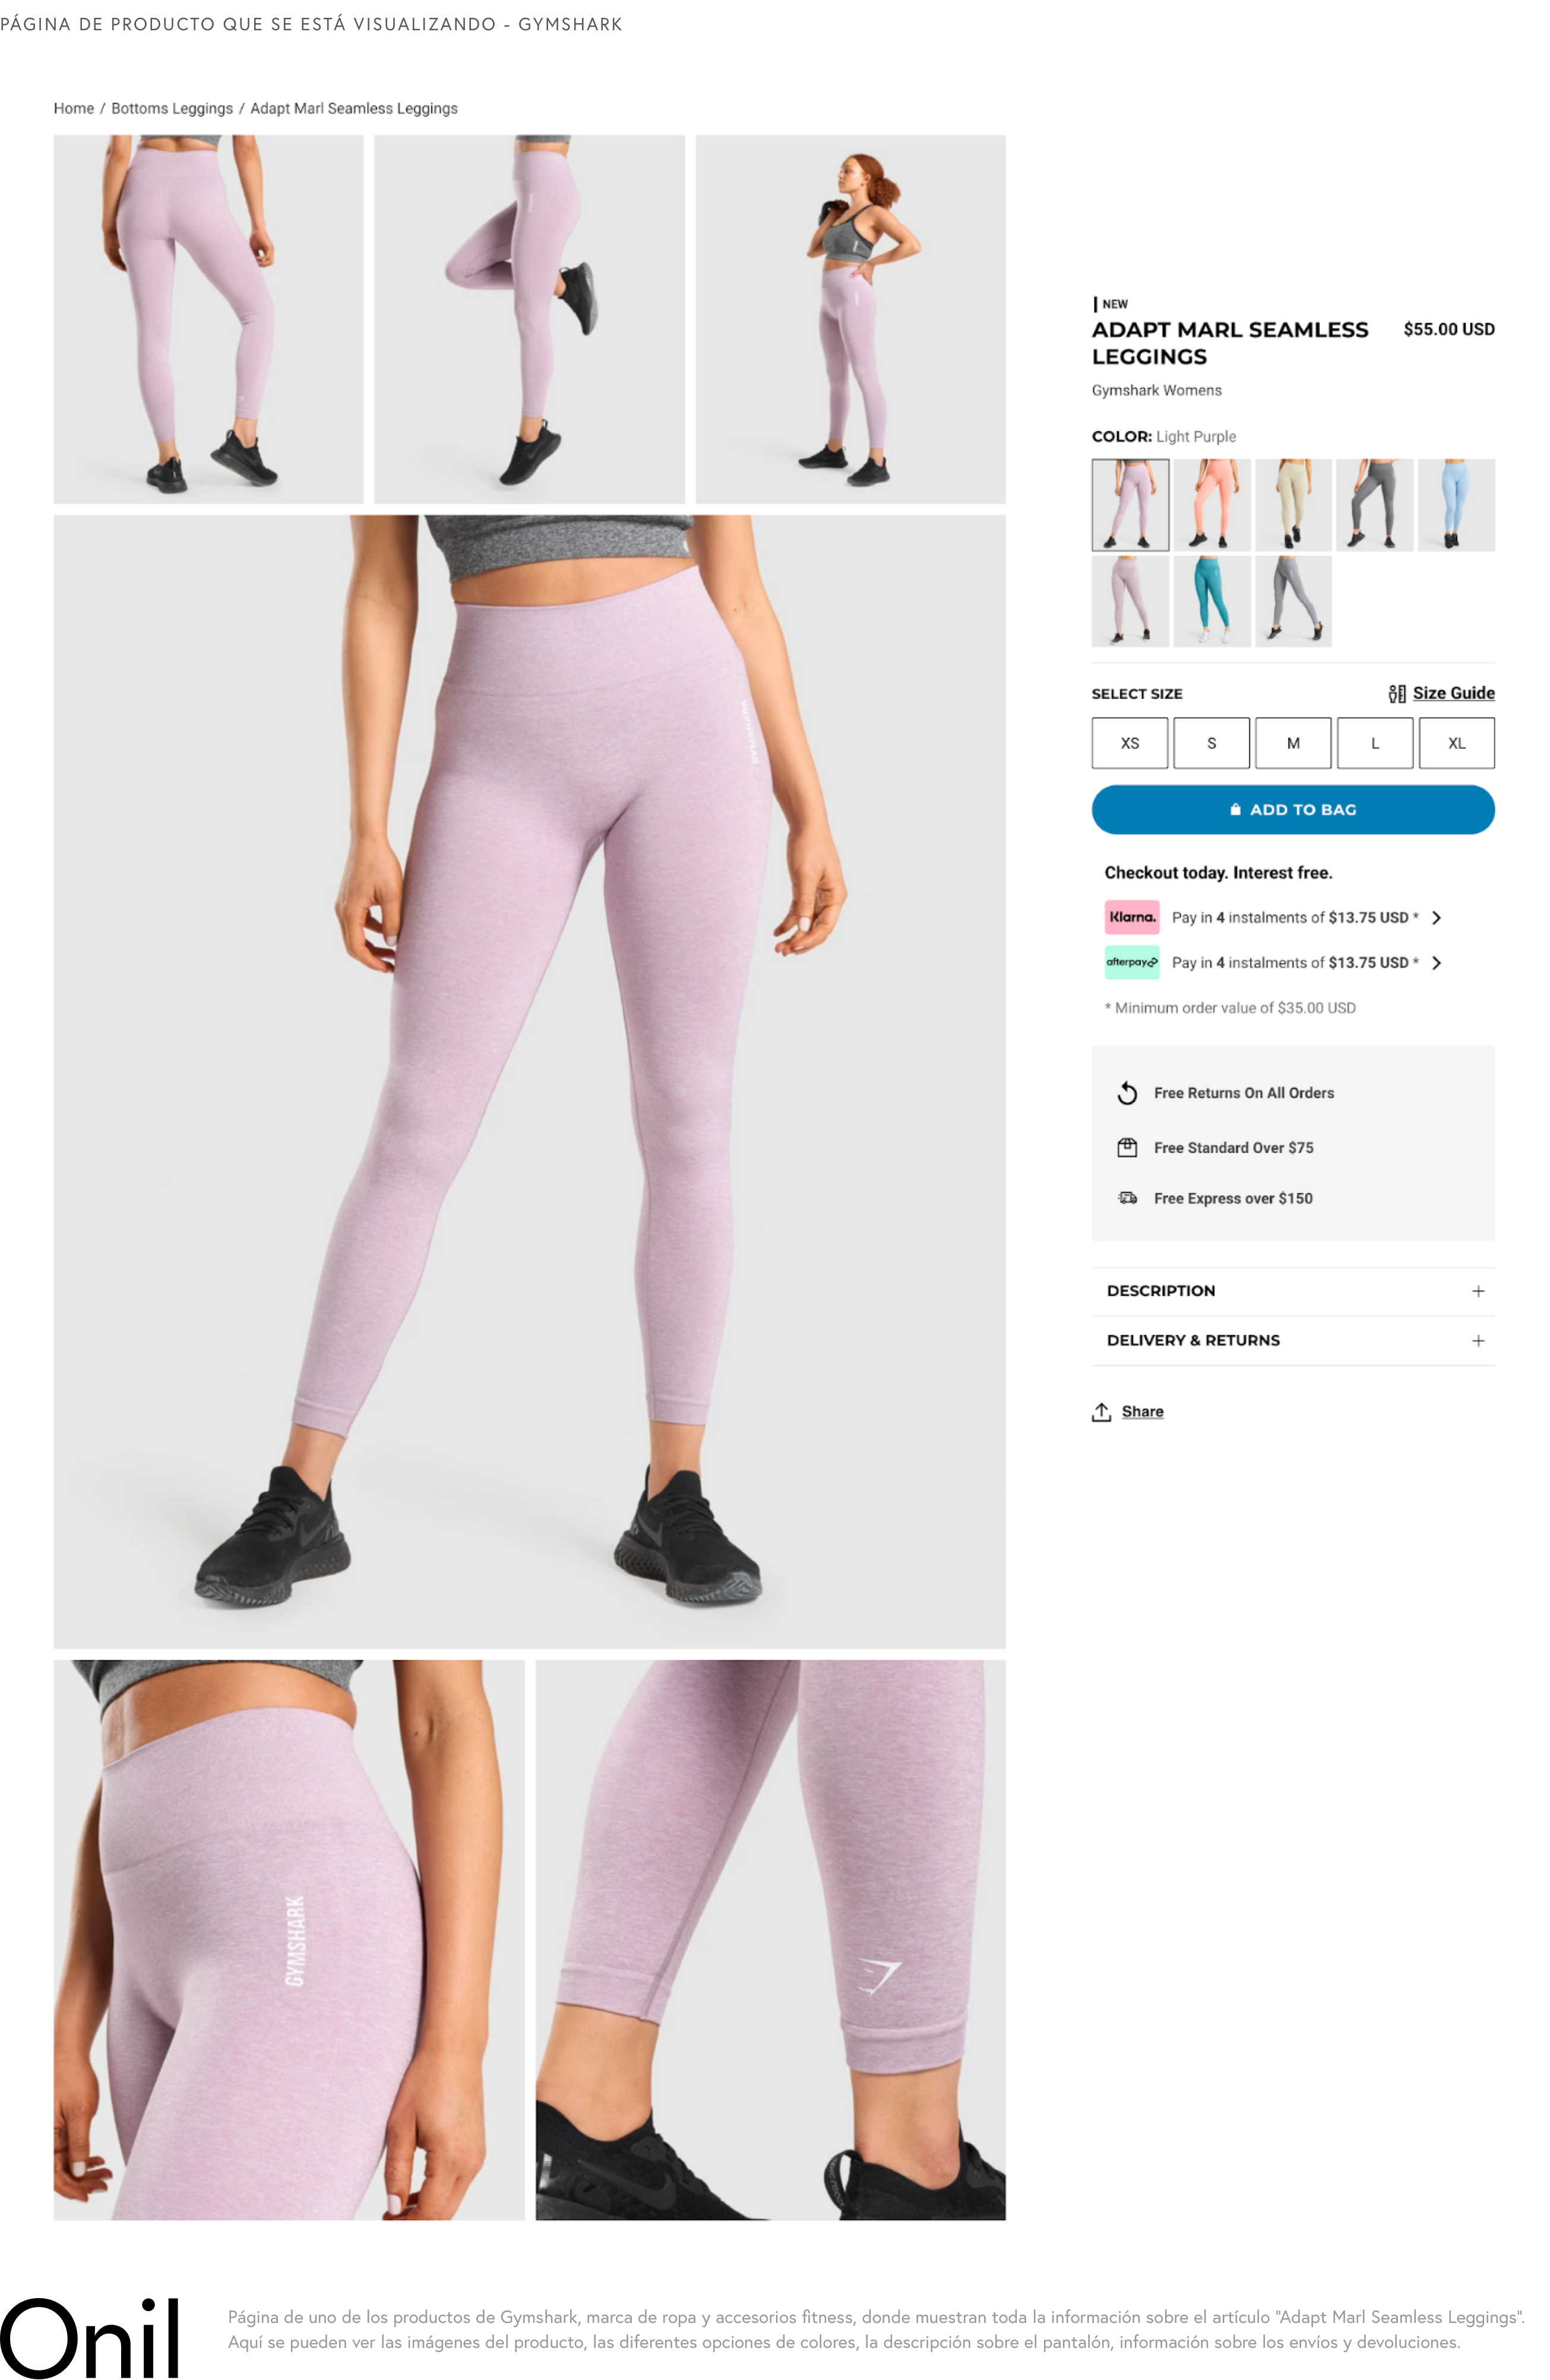 Product page being displayed - Page of one of Gymshark's products where they show all the information about the article “Adapt Marl Seamless Leggings”.